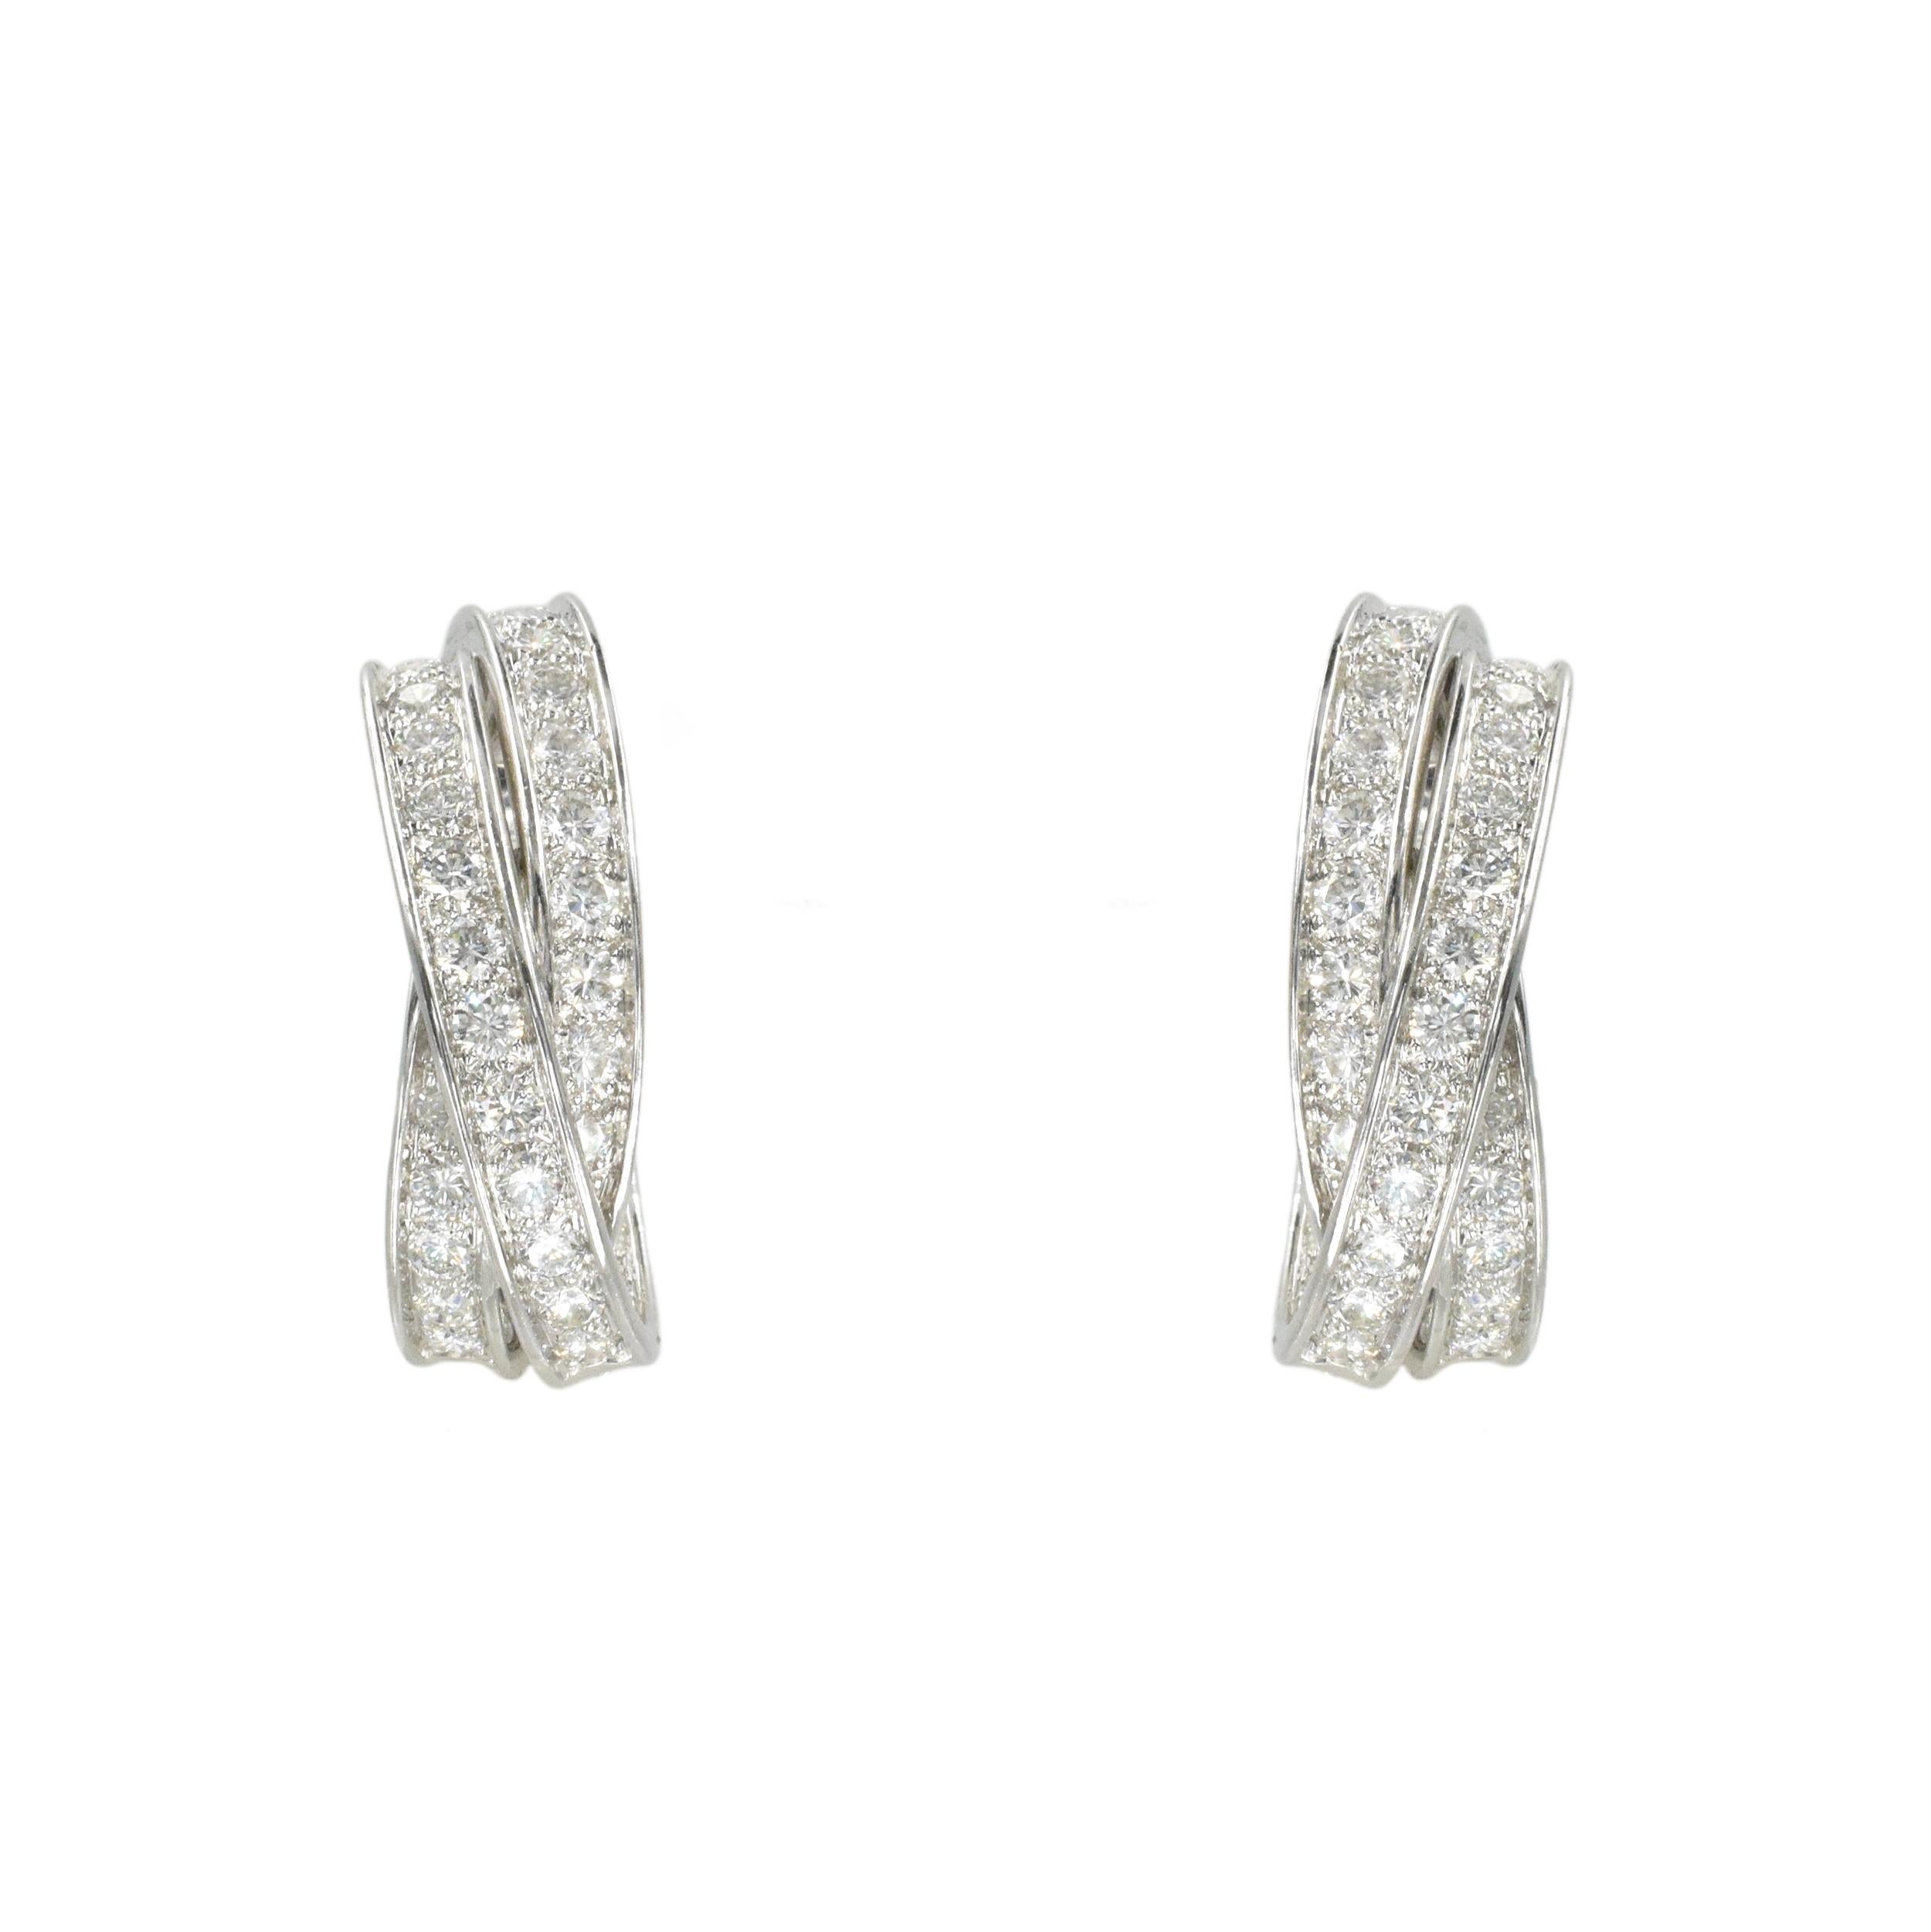 Cartier Trinity Inside Out Diamond Ear-clips In 18k White Gold. This pair of hoops feature three
interlocking bands design set with round brilliant cut diamonds with a total weight of
approximately 5.0 carats Color: F/G, Clarity: VS+. Crafted in 18k